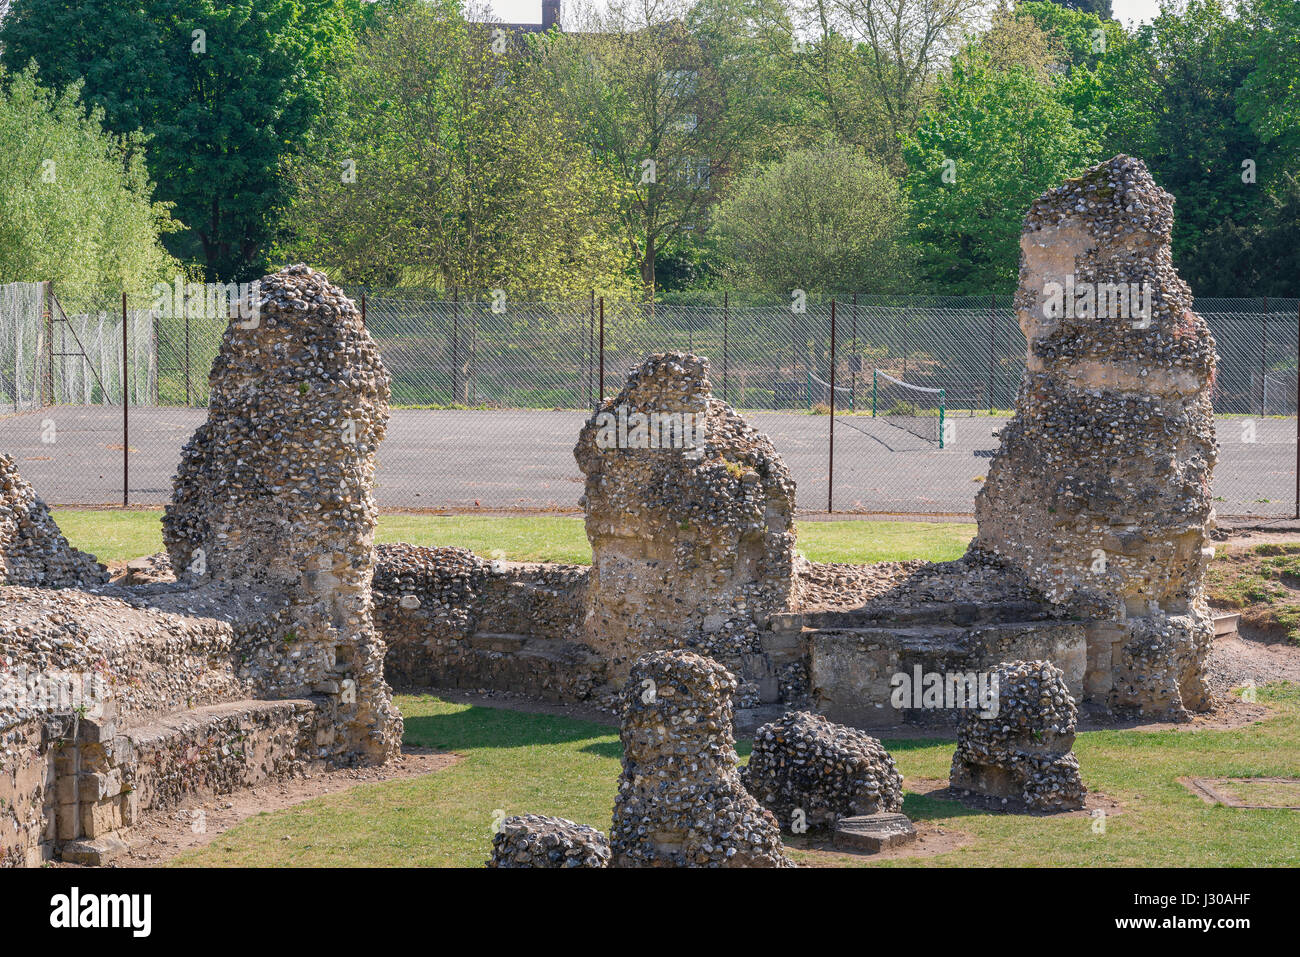 Bury St Edmunds Abbey Gardens, detail of medieval abbey ruins in Bury St Edmunds Abbey Gardens, with the old tennis court in the background, UK. Stock Photo